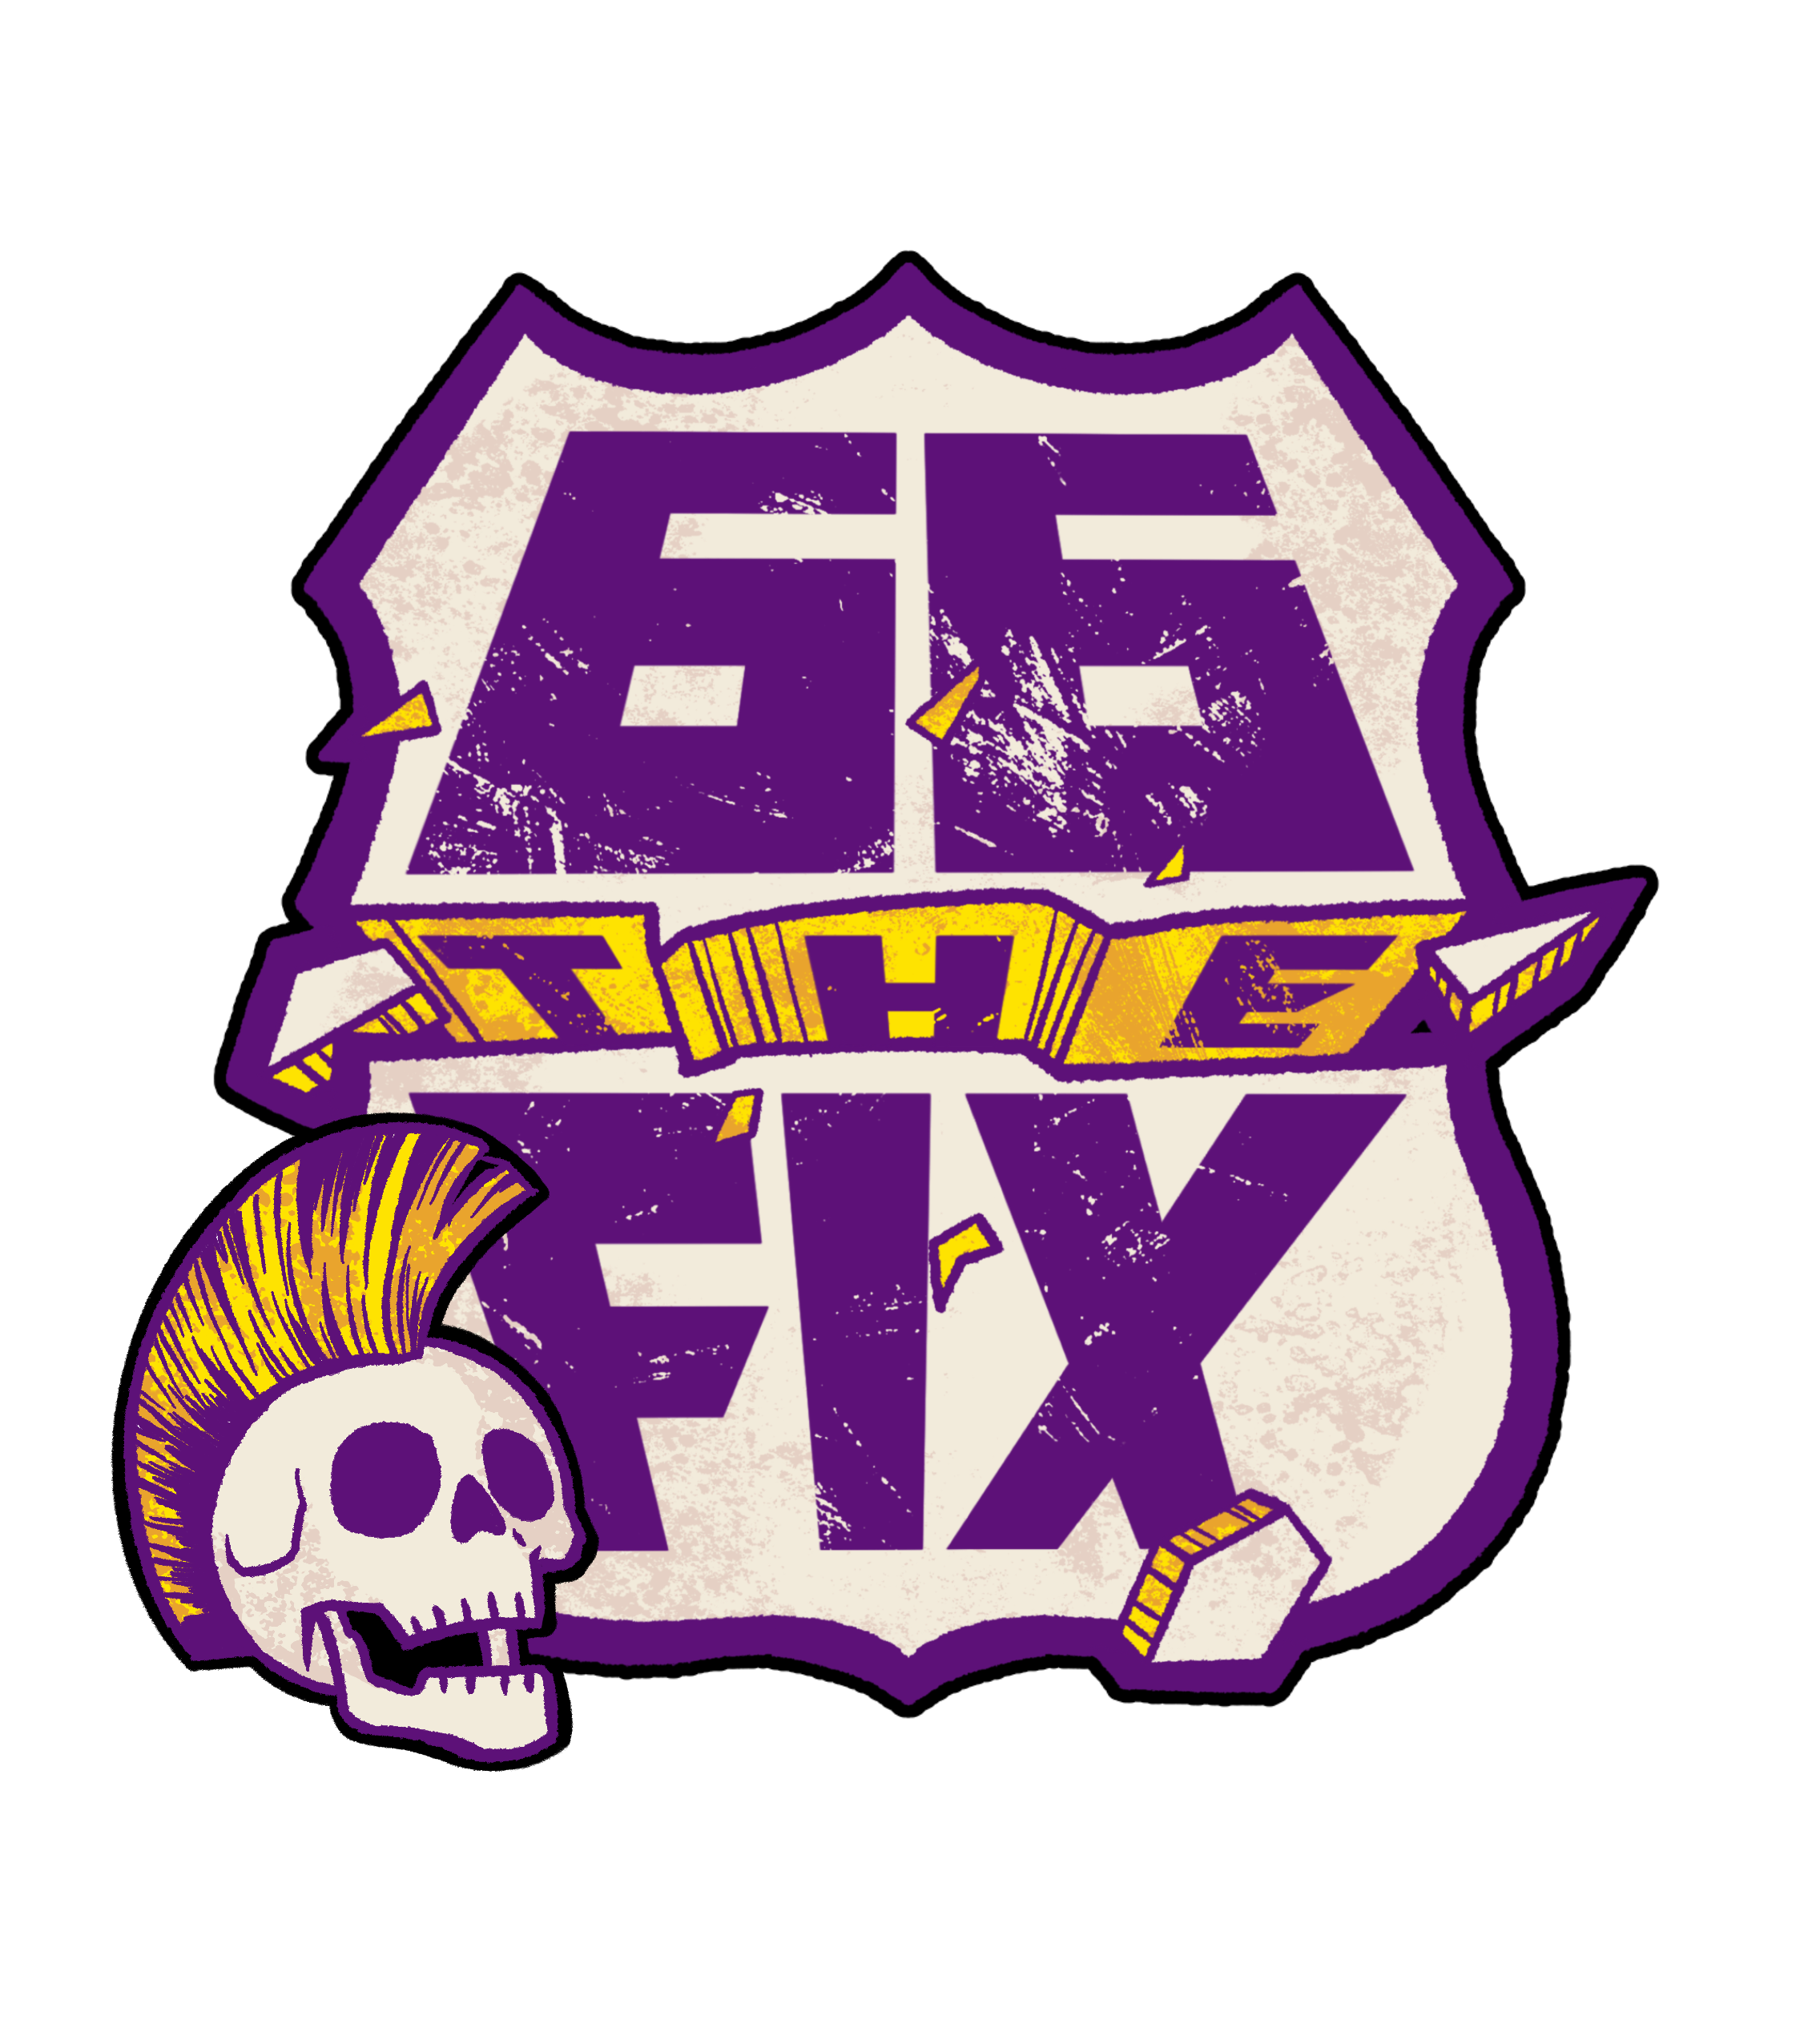 66 the FIX "Get Your FIX on Route 66"